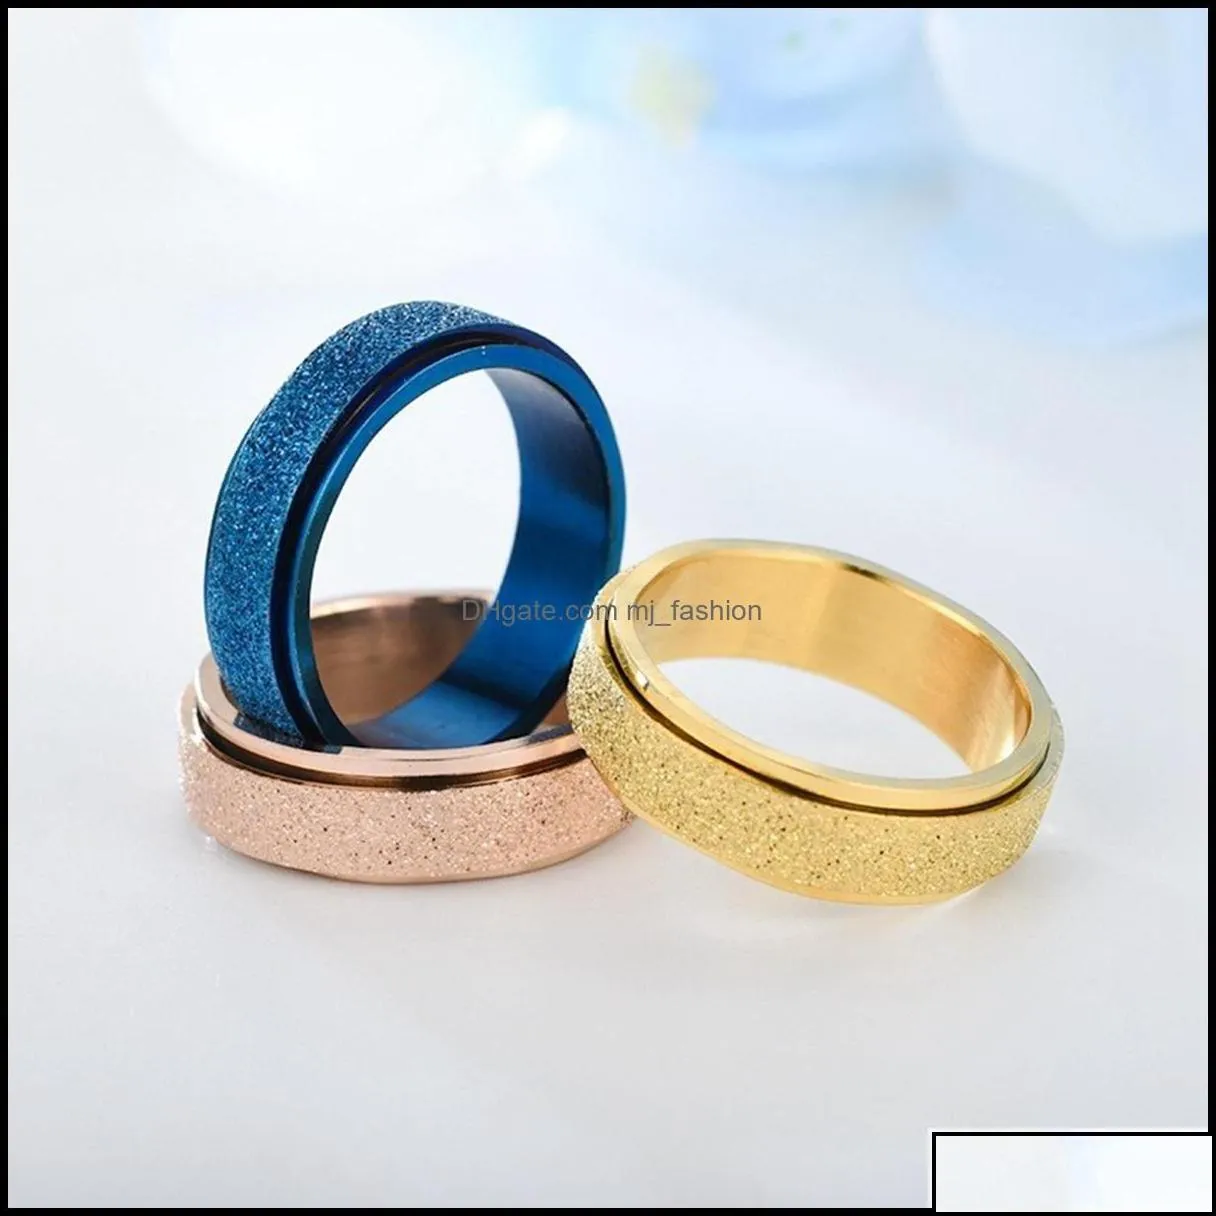 band rings women steel ring men girl boy anxiety relief 6mm fidget sier gold blue stainless jewelry perfect weddings parties celebrat